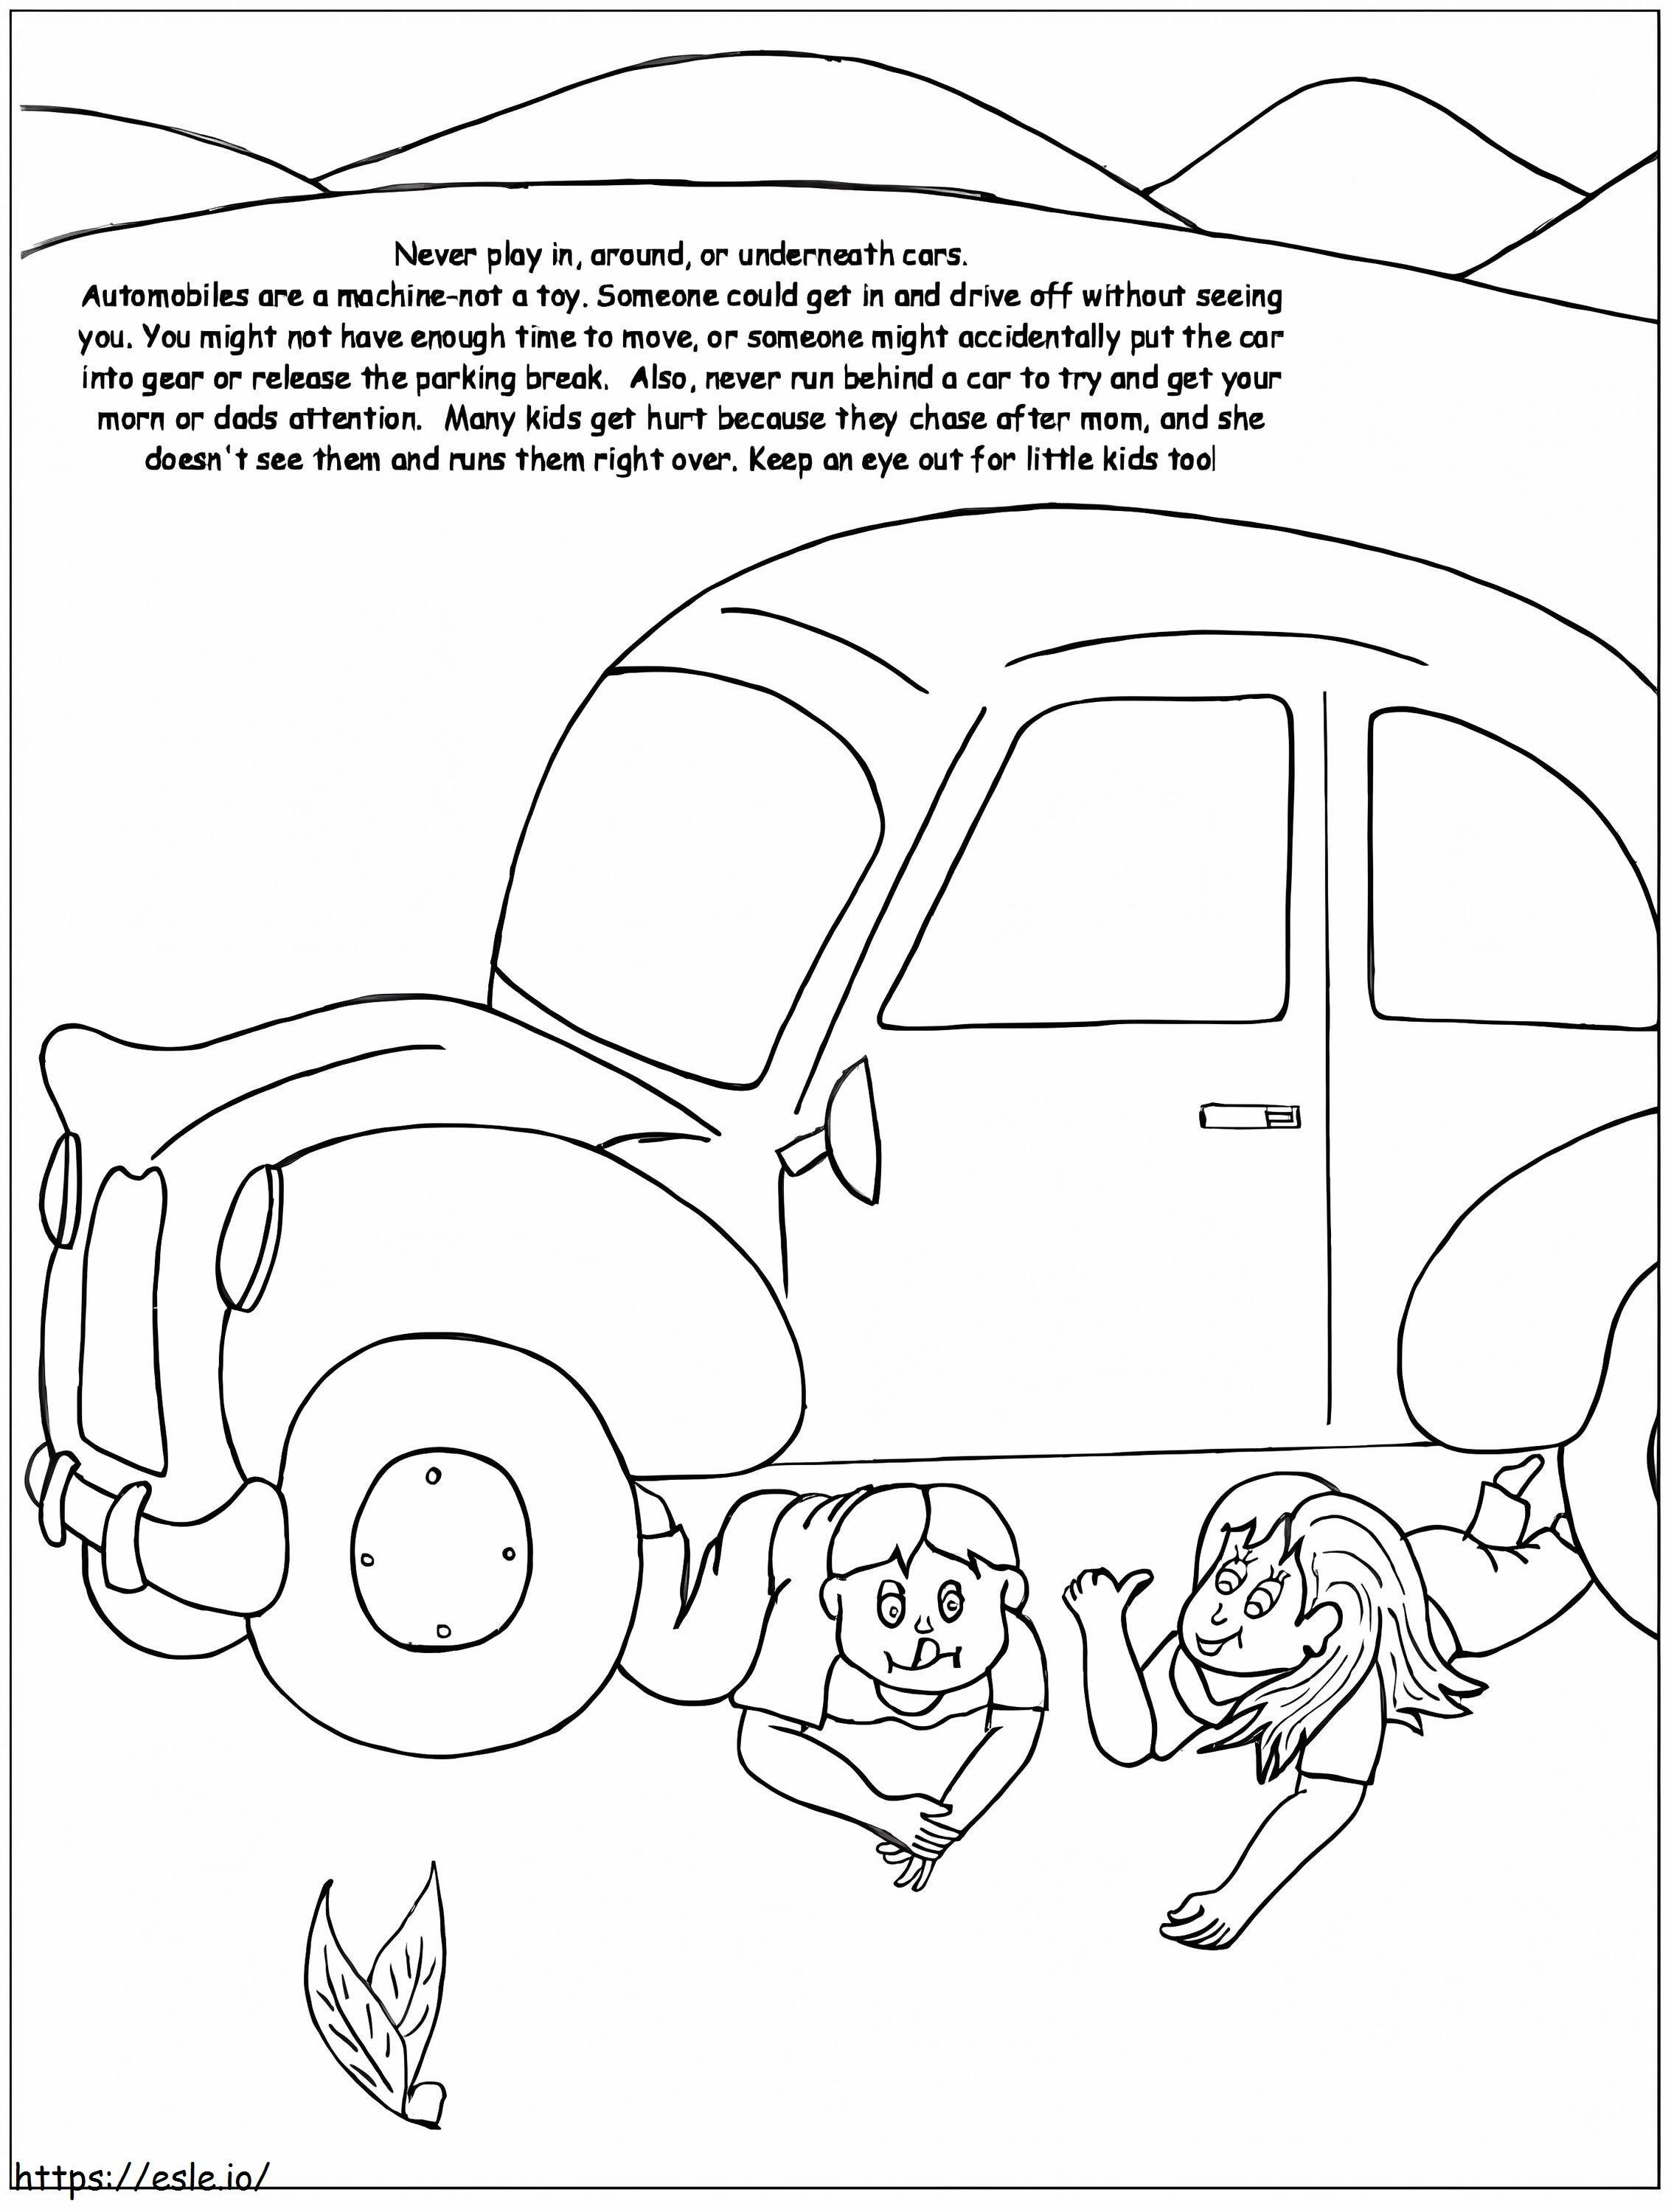 Dont Play Under Cars coloring page